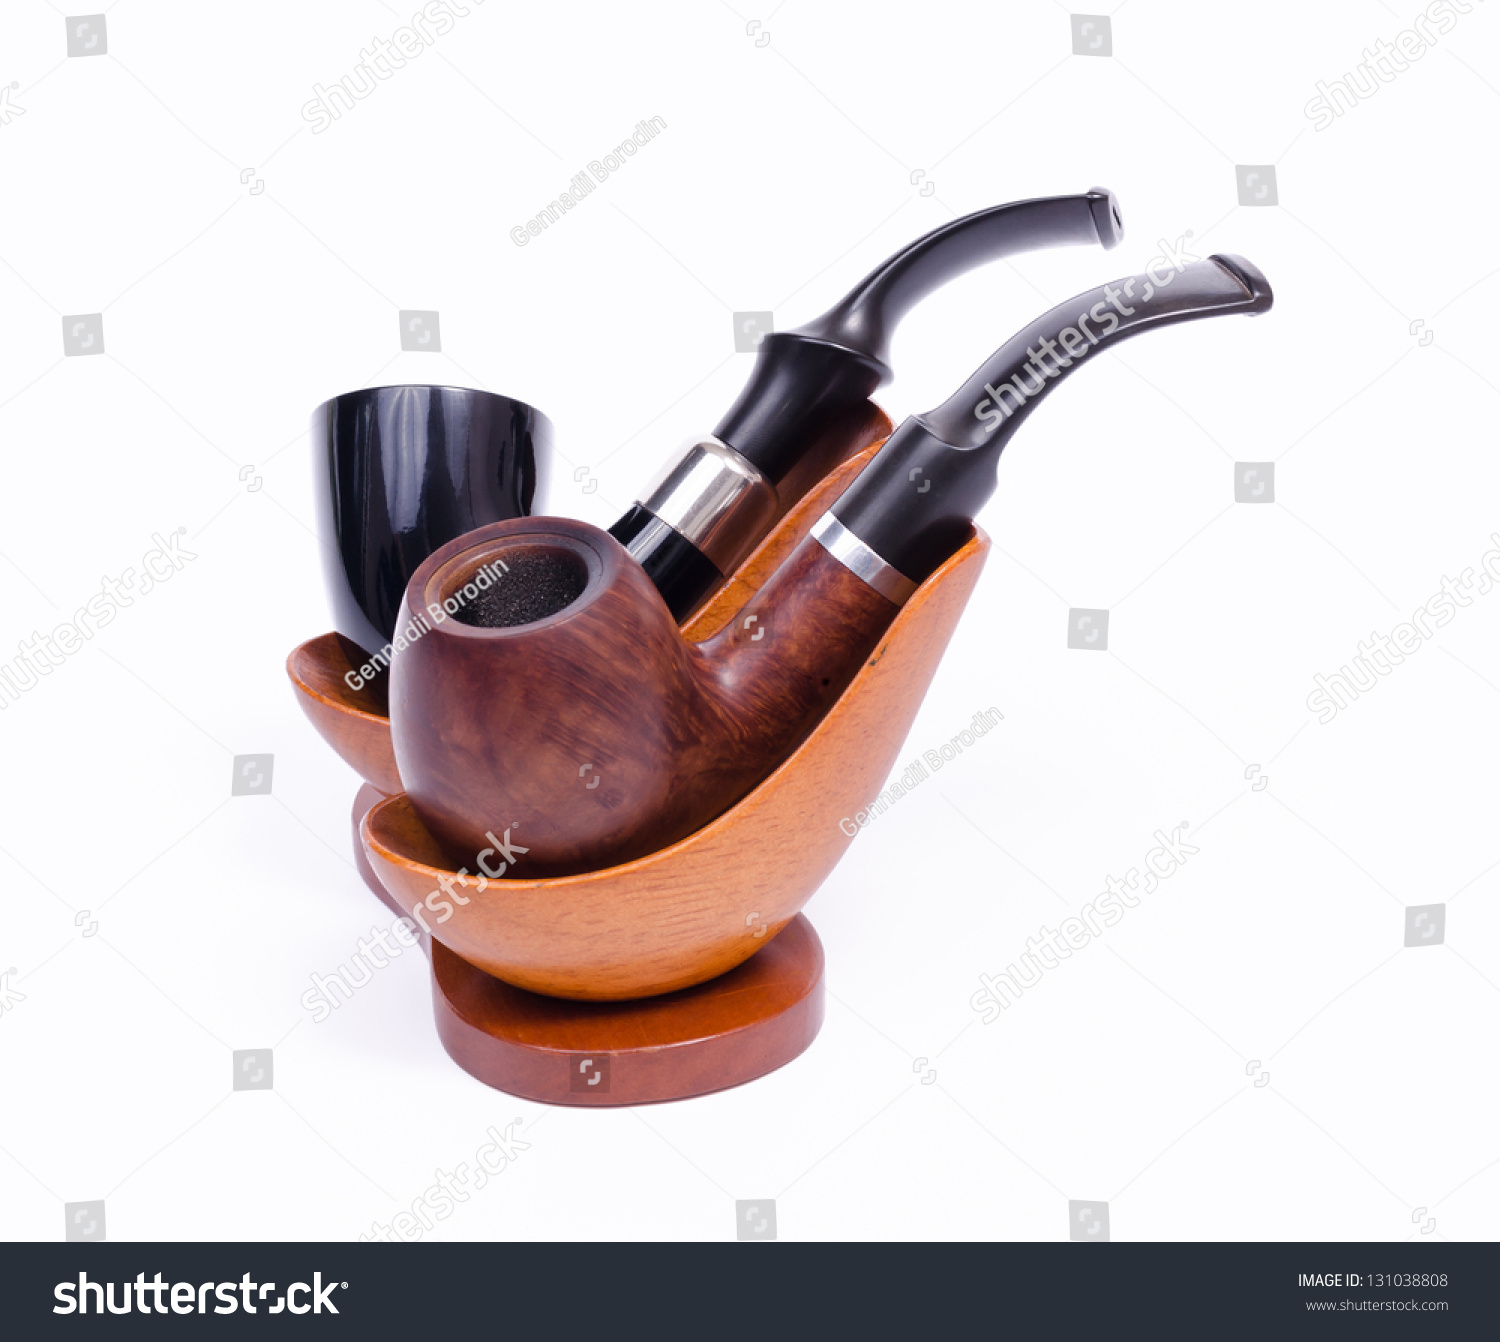 Two Pipes On Stand Stock Photo 131038808 - Shutterstock